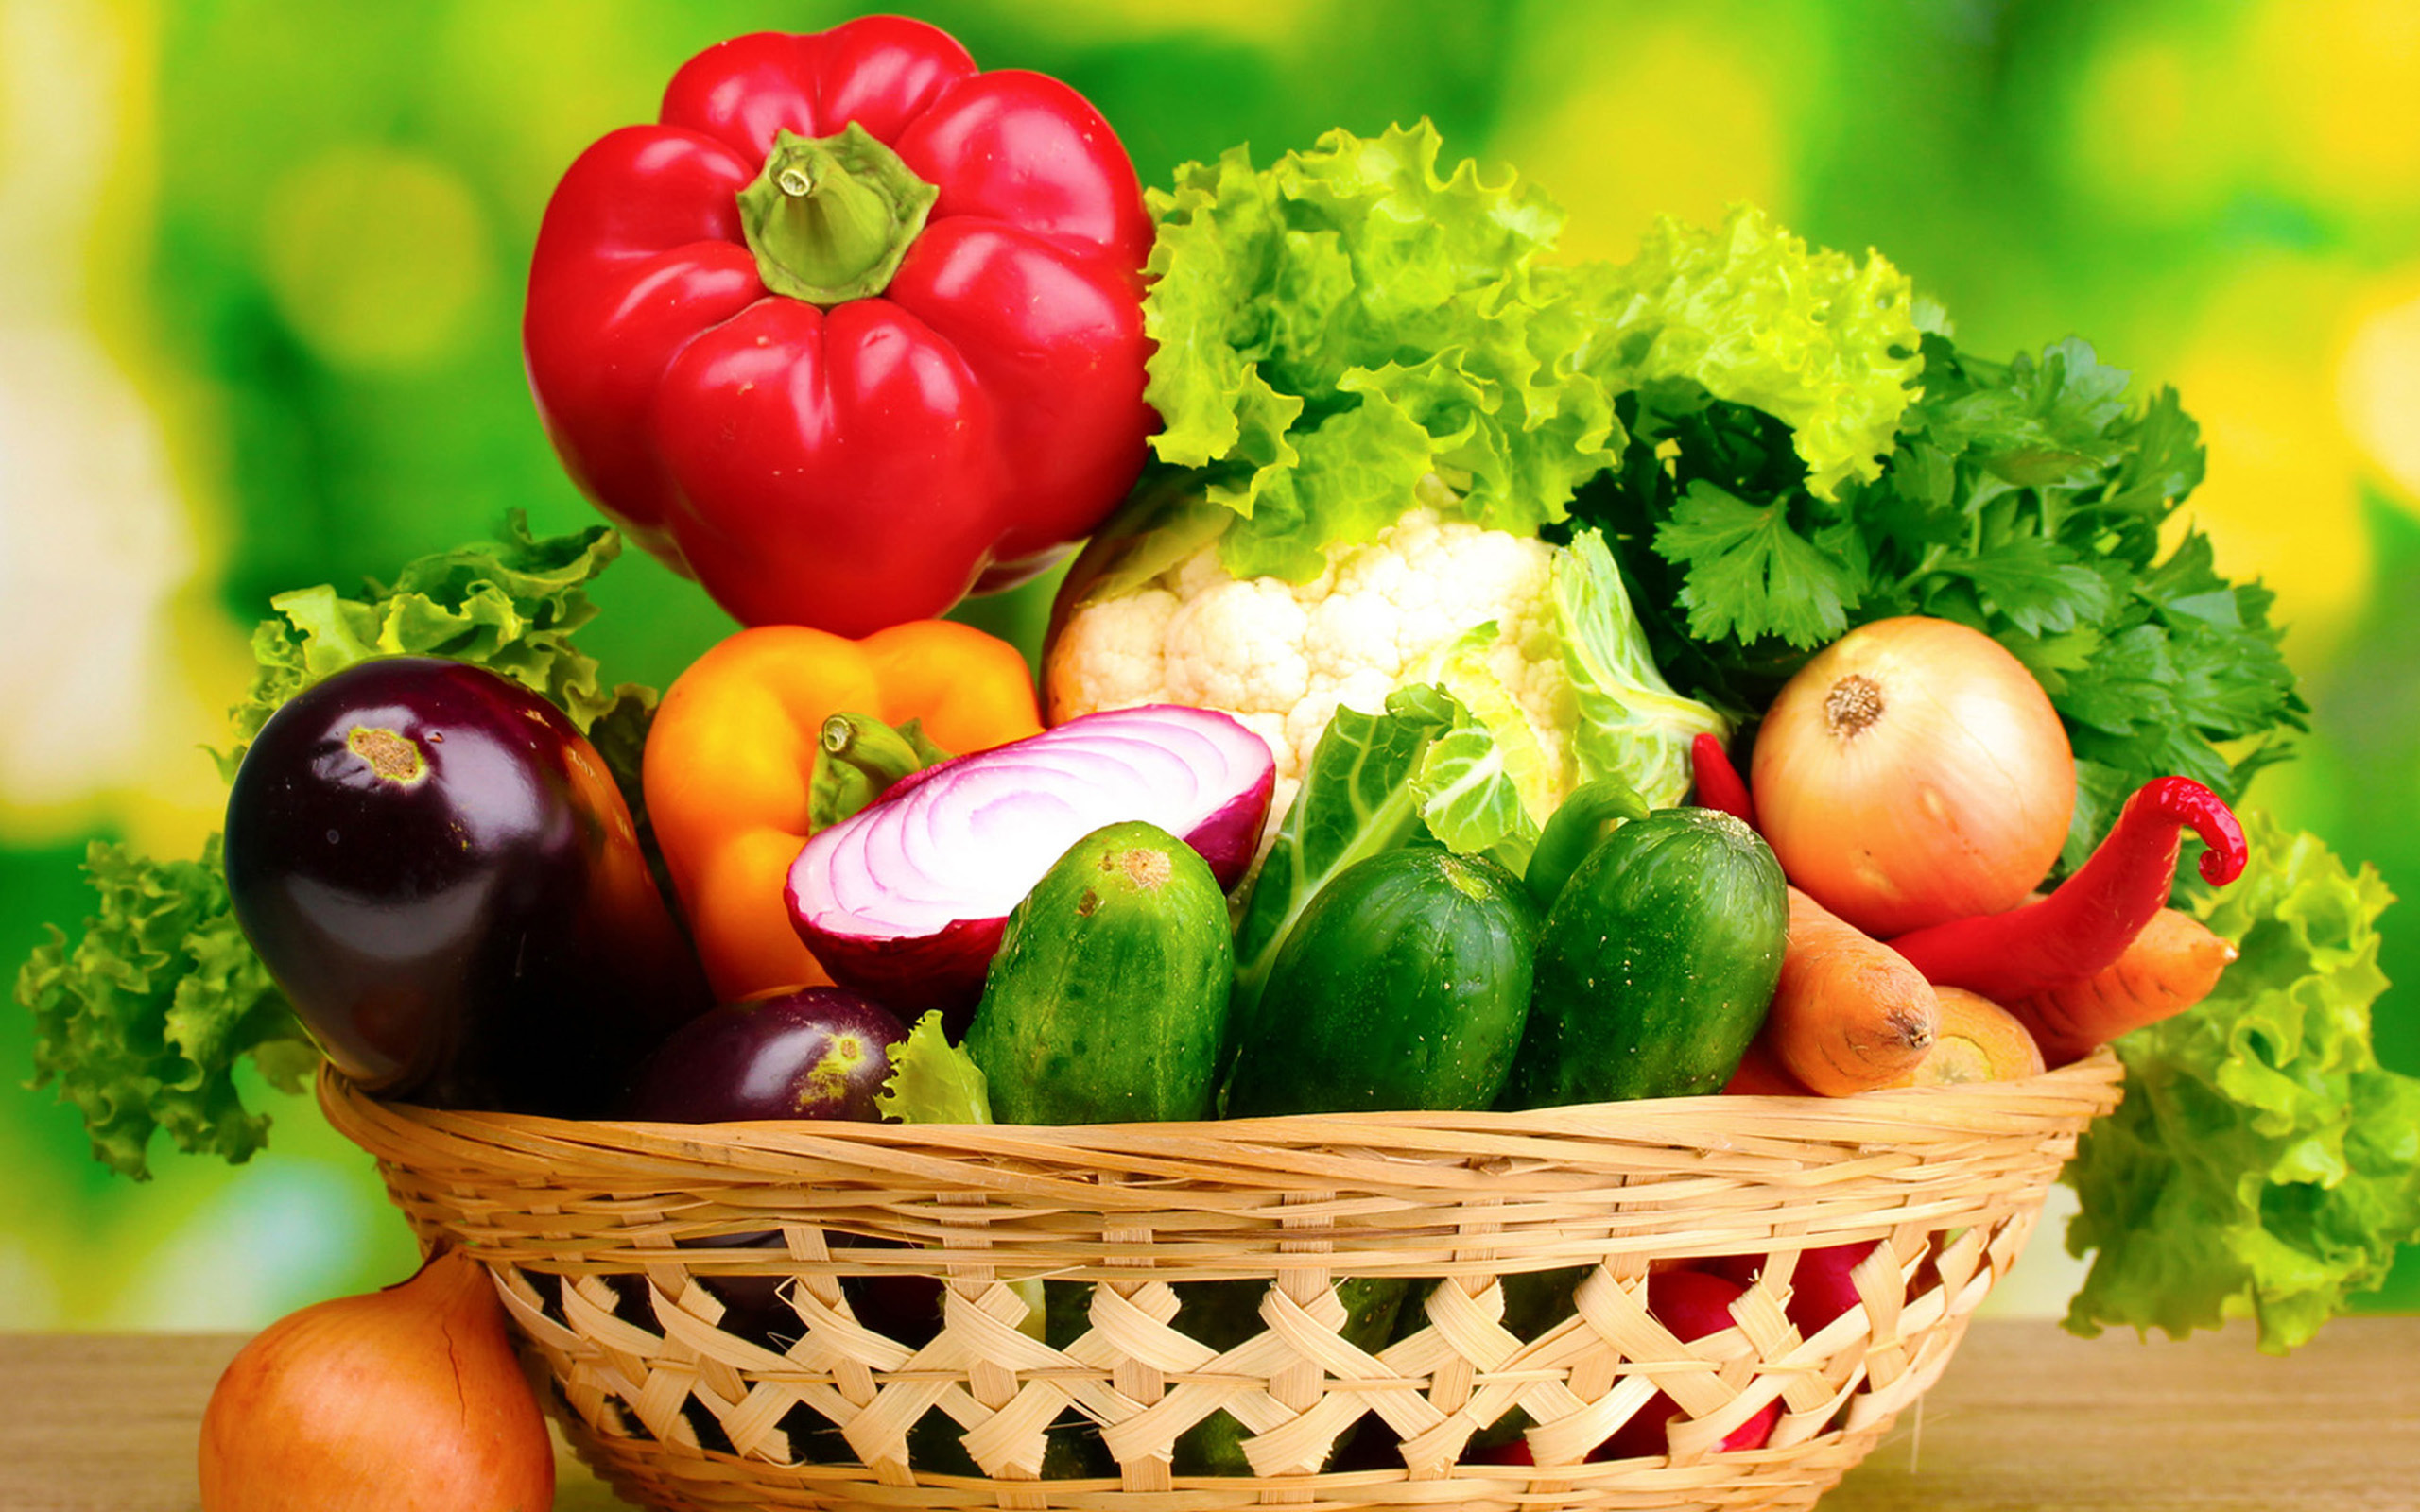 Healthy vegetable selection, Fresh and nutritious, Colorful food wallpaper, Vibrant ingredients, 2560x1600 HD Desktop